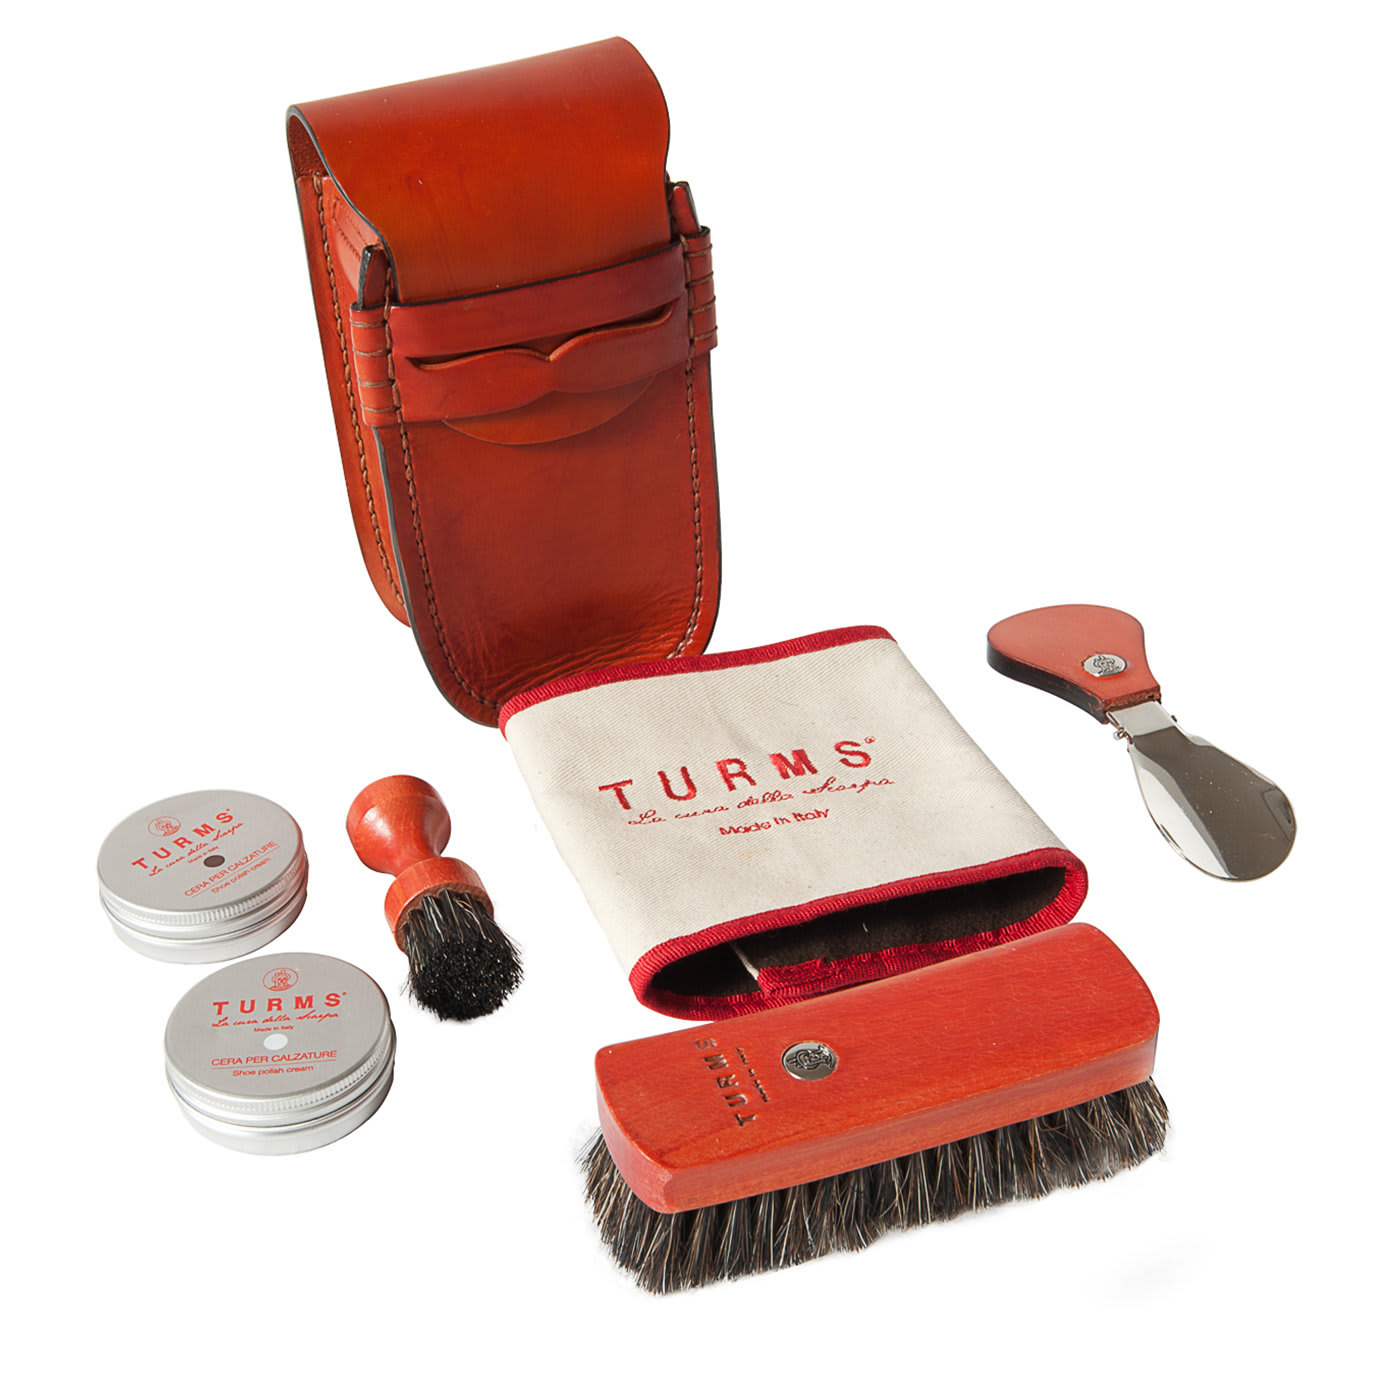 Turms, Complete Shoe Care Kit for Leather